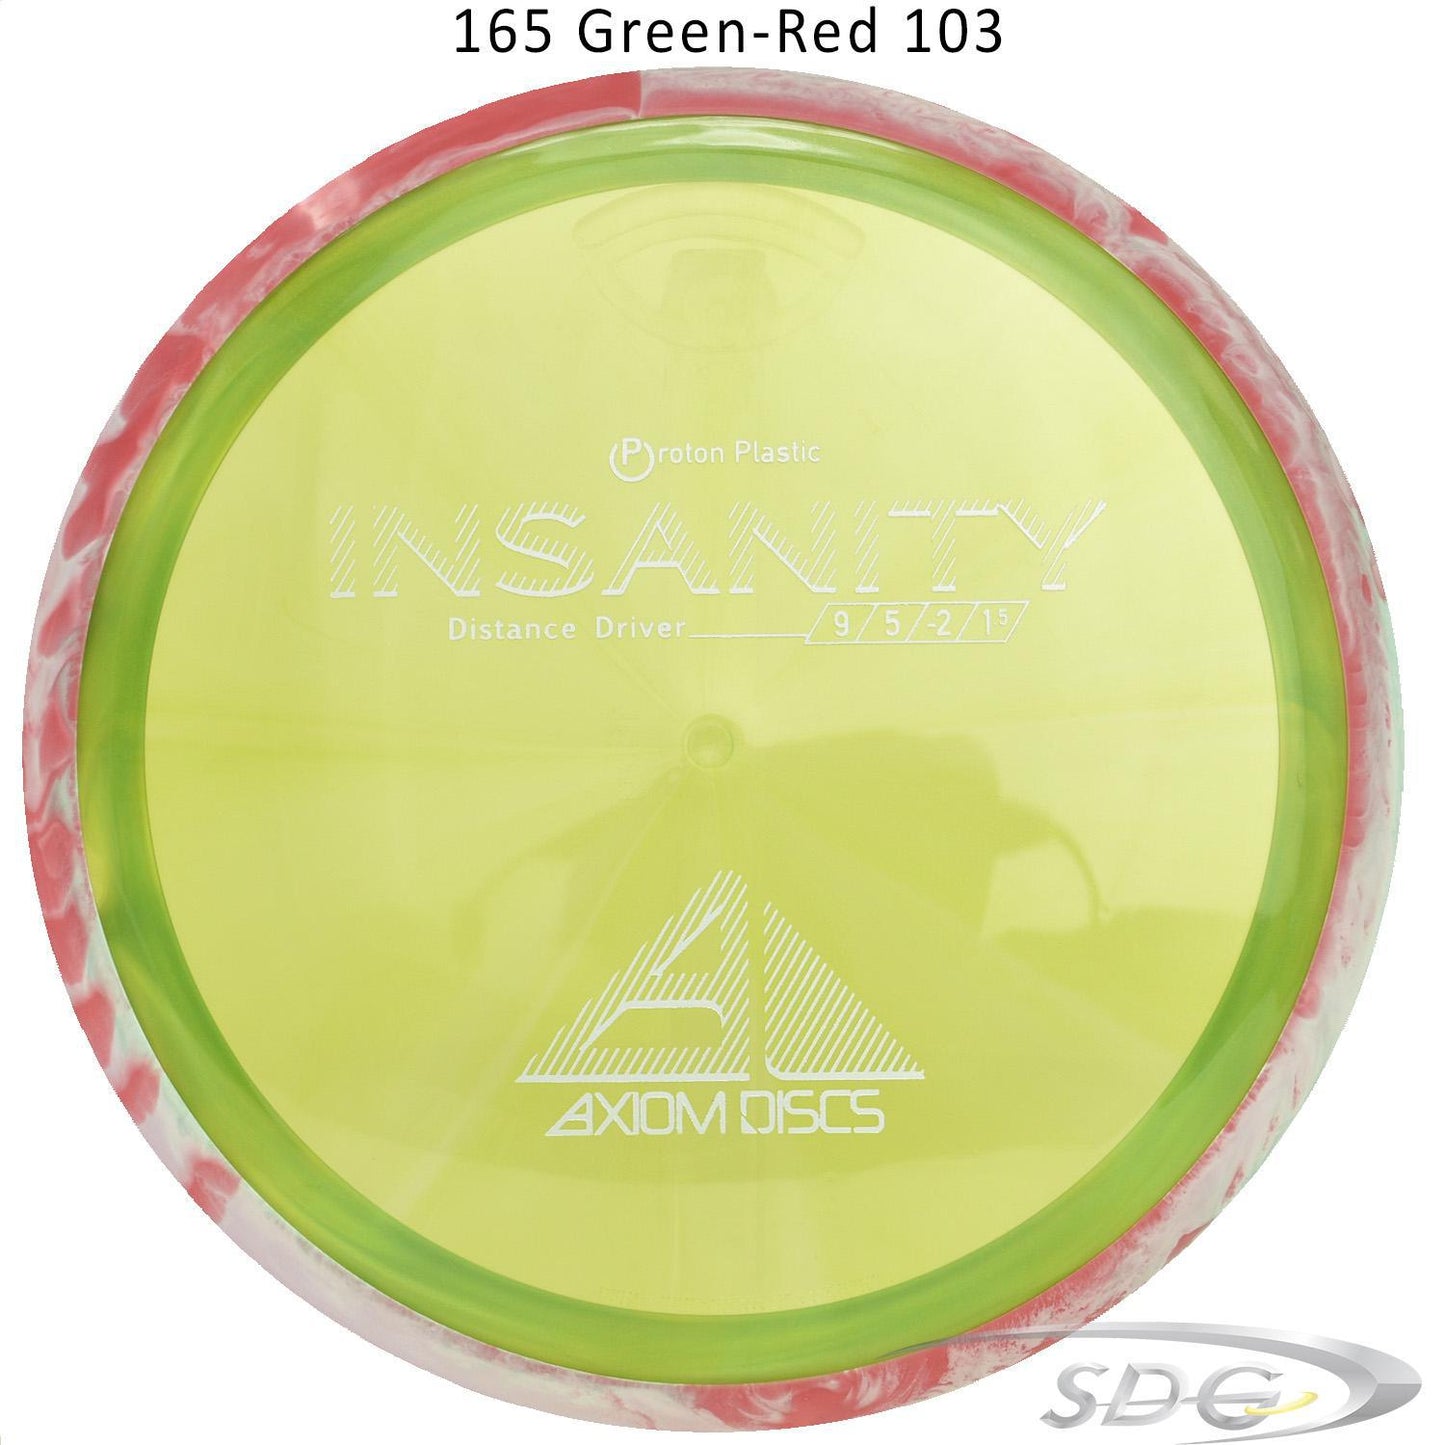 axiom-proton-insanity-disc-golf-distance-driver 165 Green-Red 103 